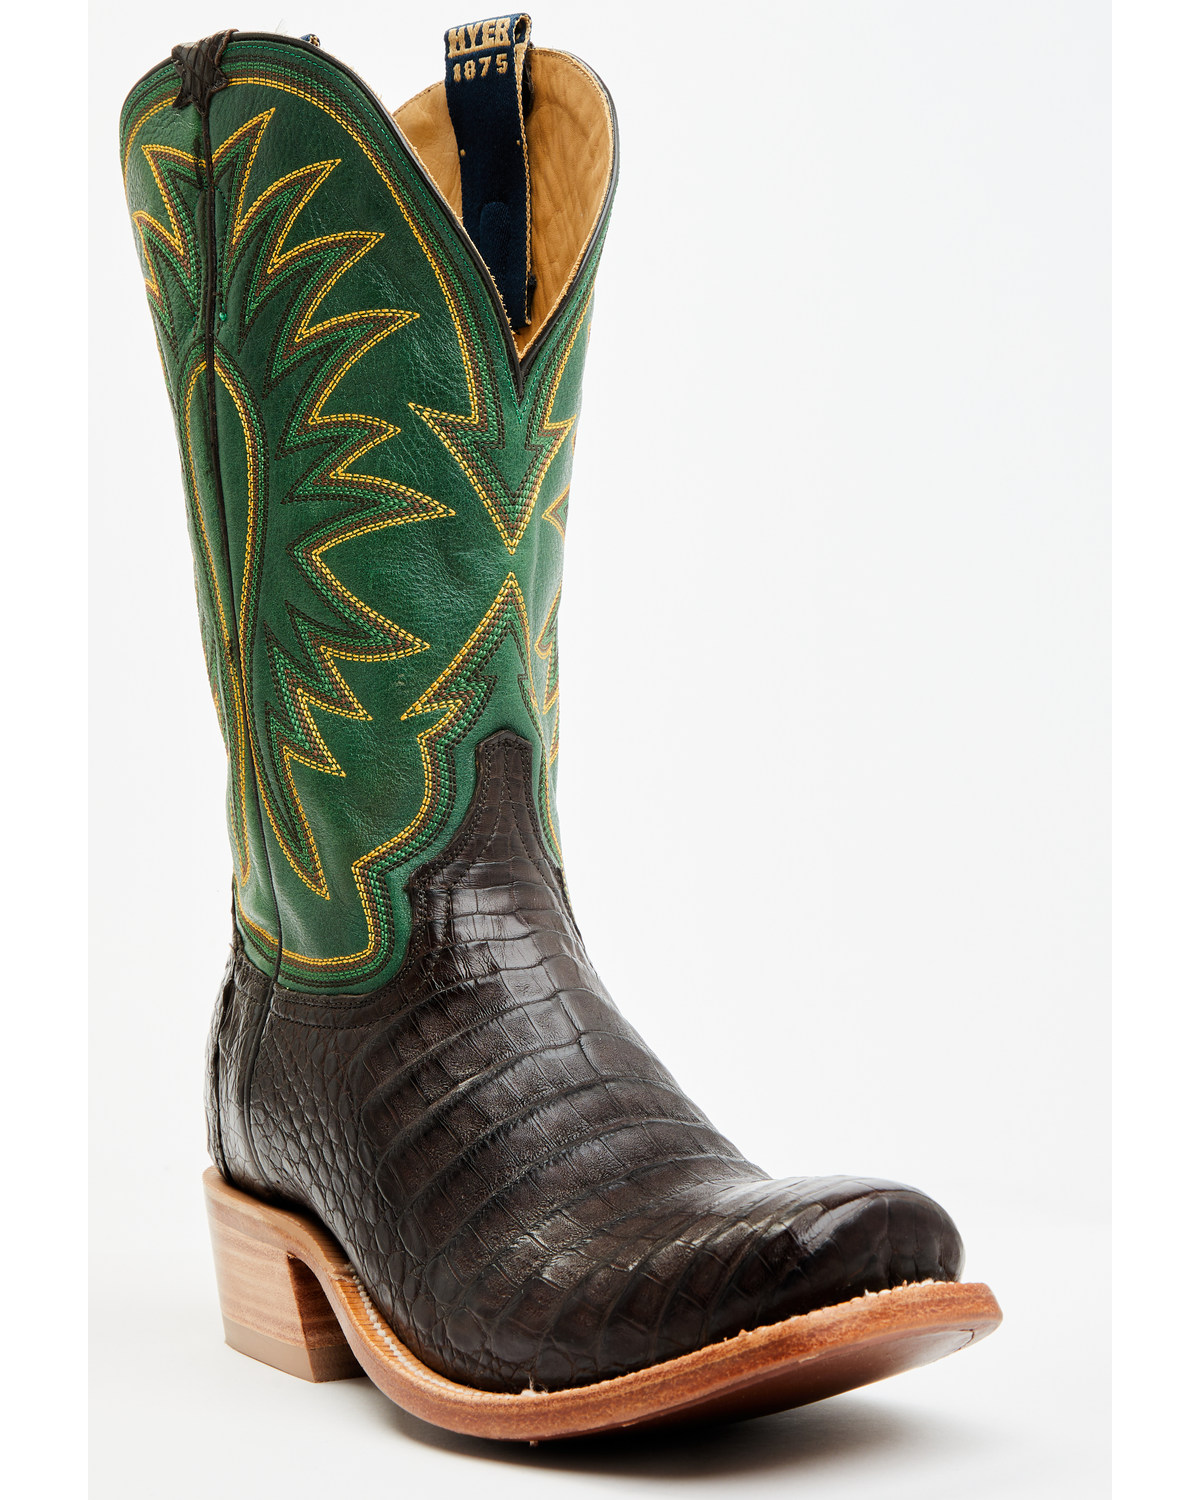 Hyer Men's Spearville Exotic Caiman Western Boots - Square Toe